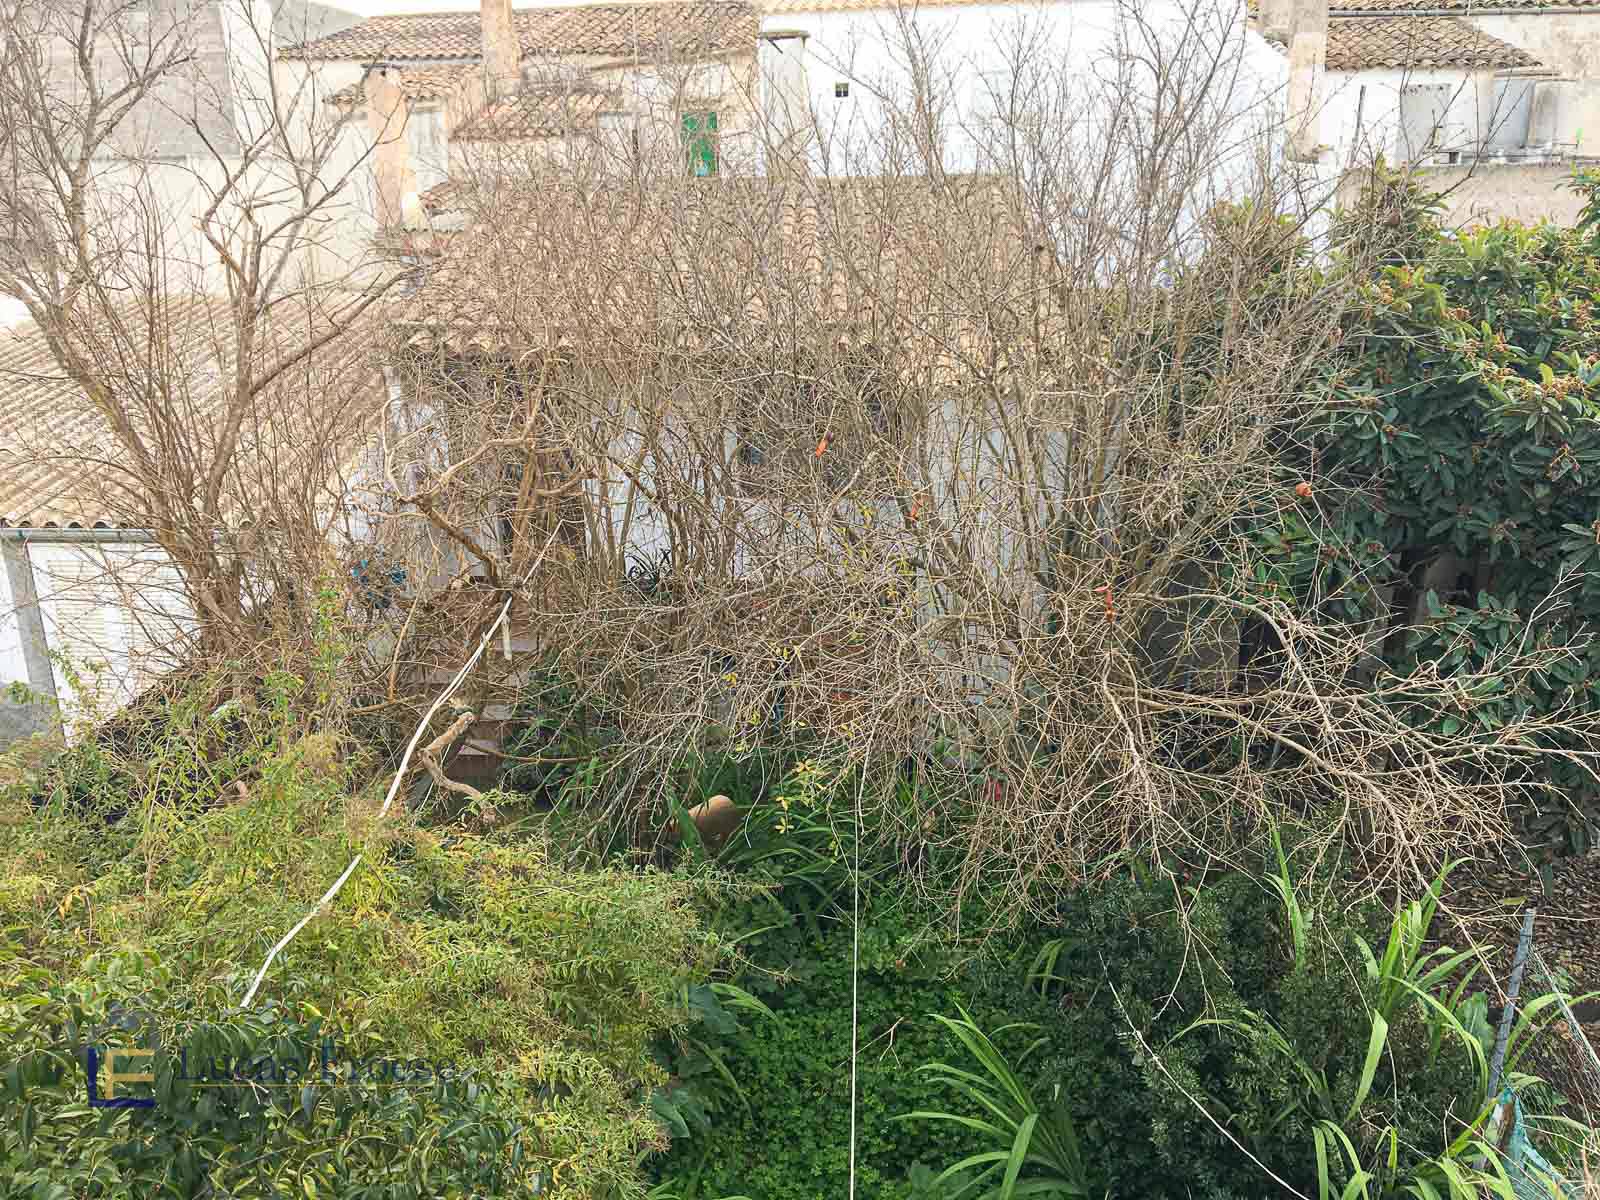 Townhouse for sale in Mallorca East 8